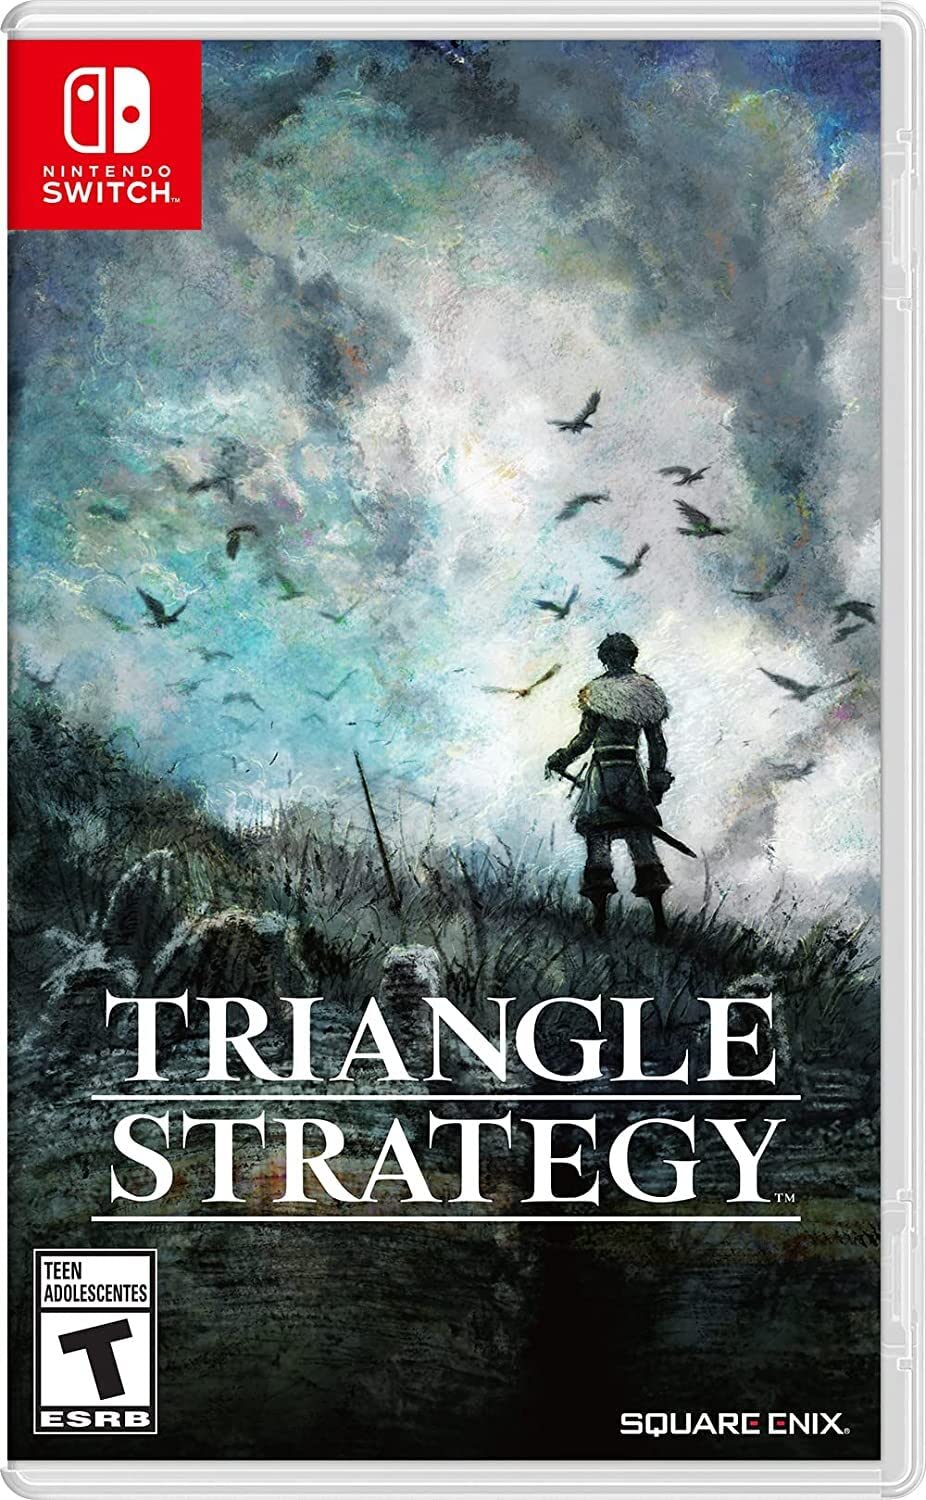 Triangle Strategy Gaming Wallpapers